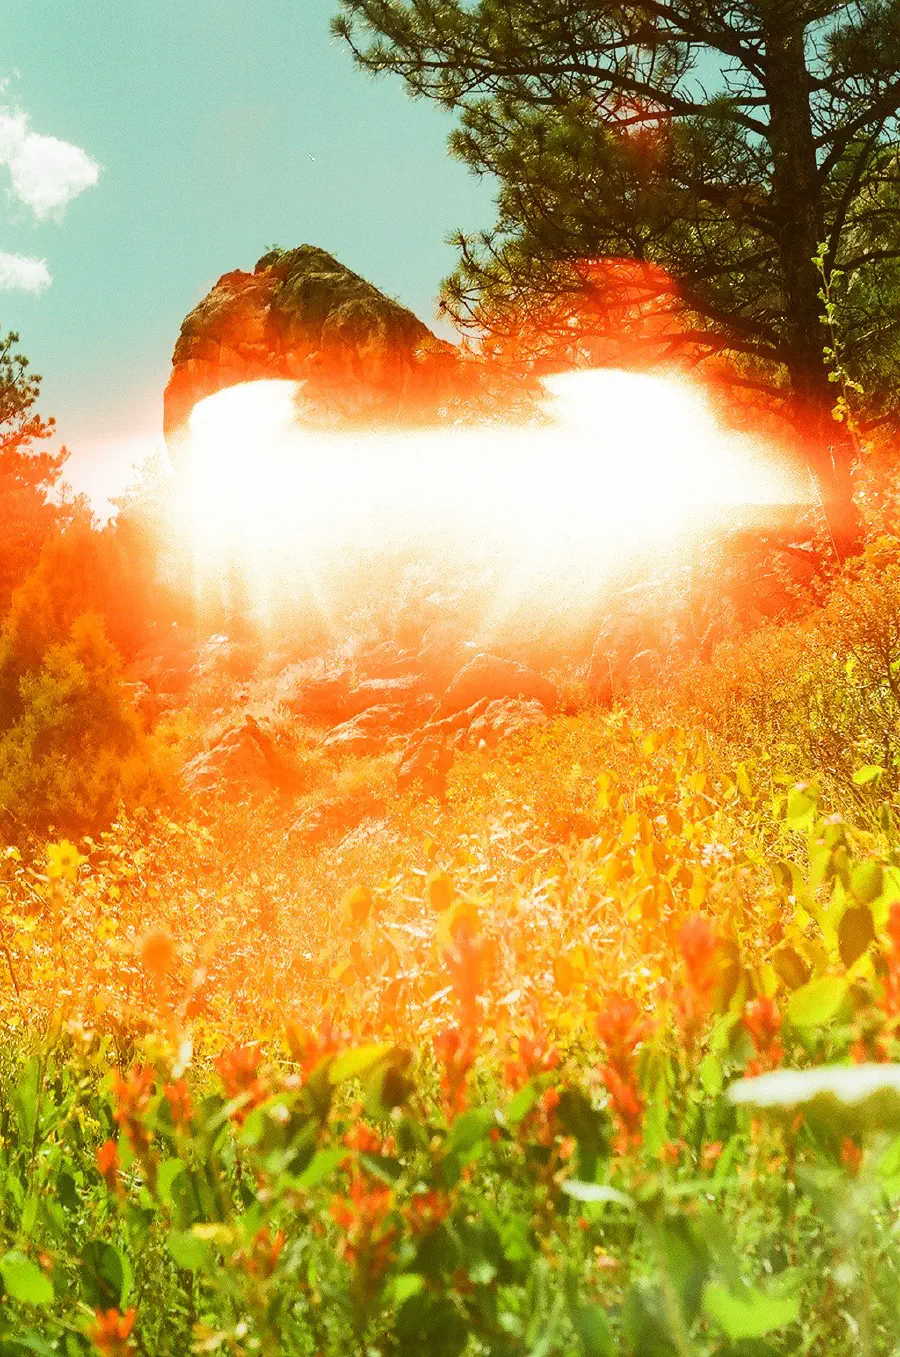 A photograph of nature with a red flare eclipsing the greenery.